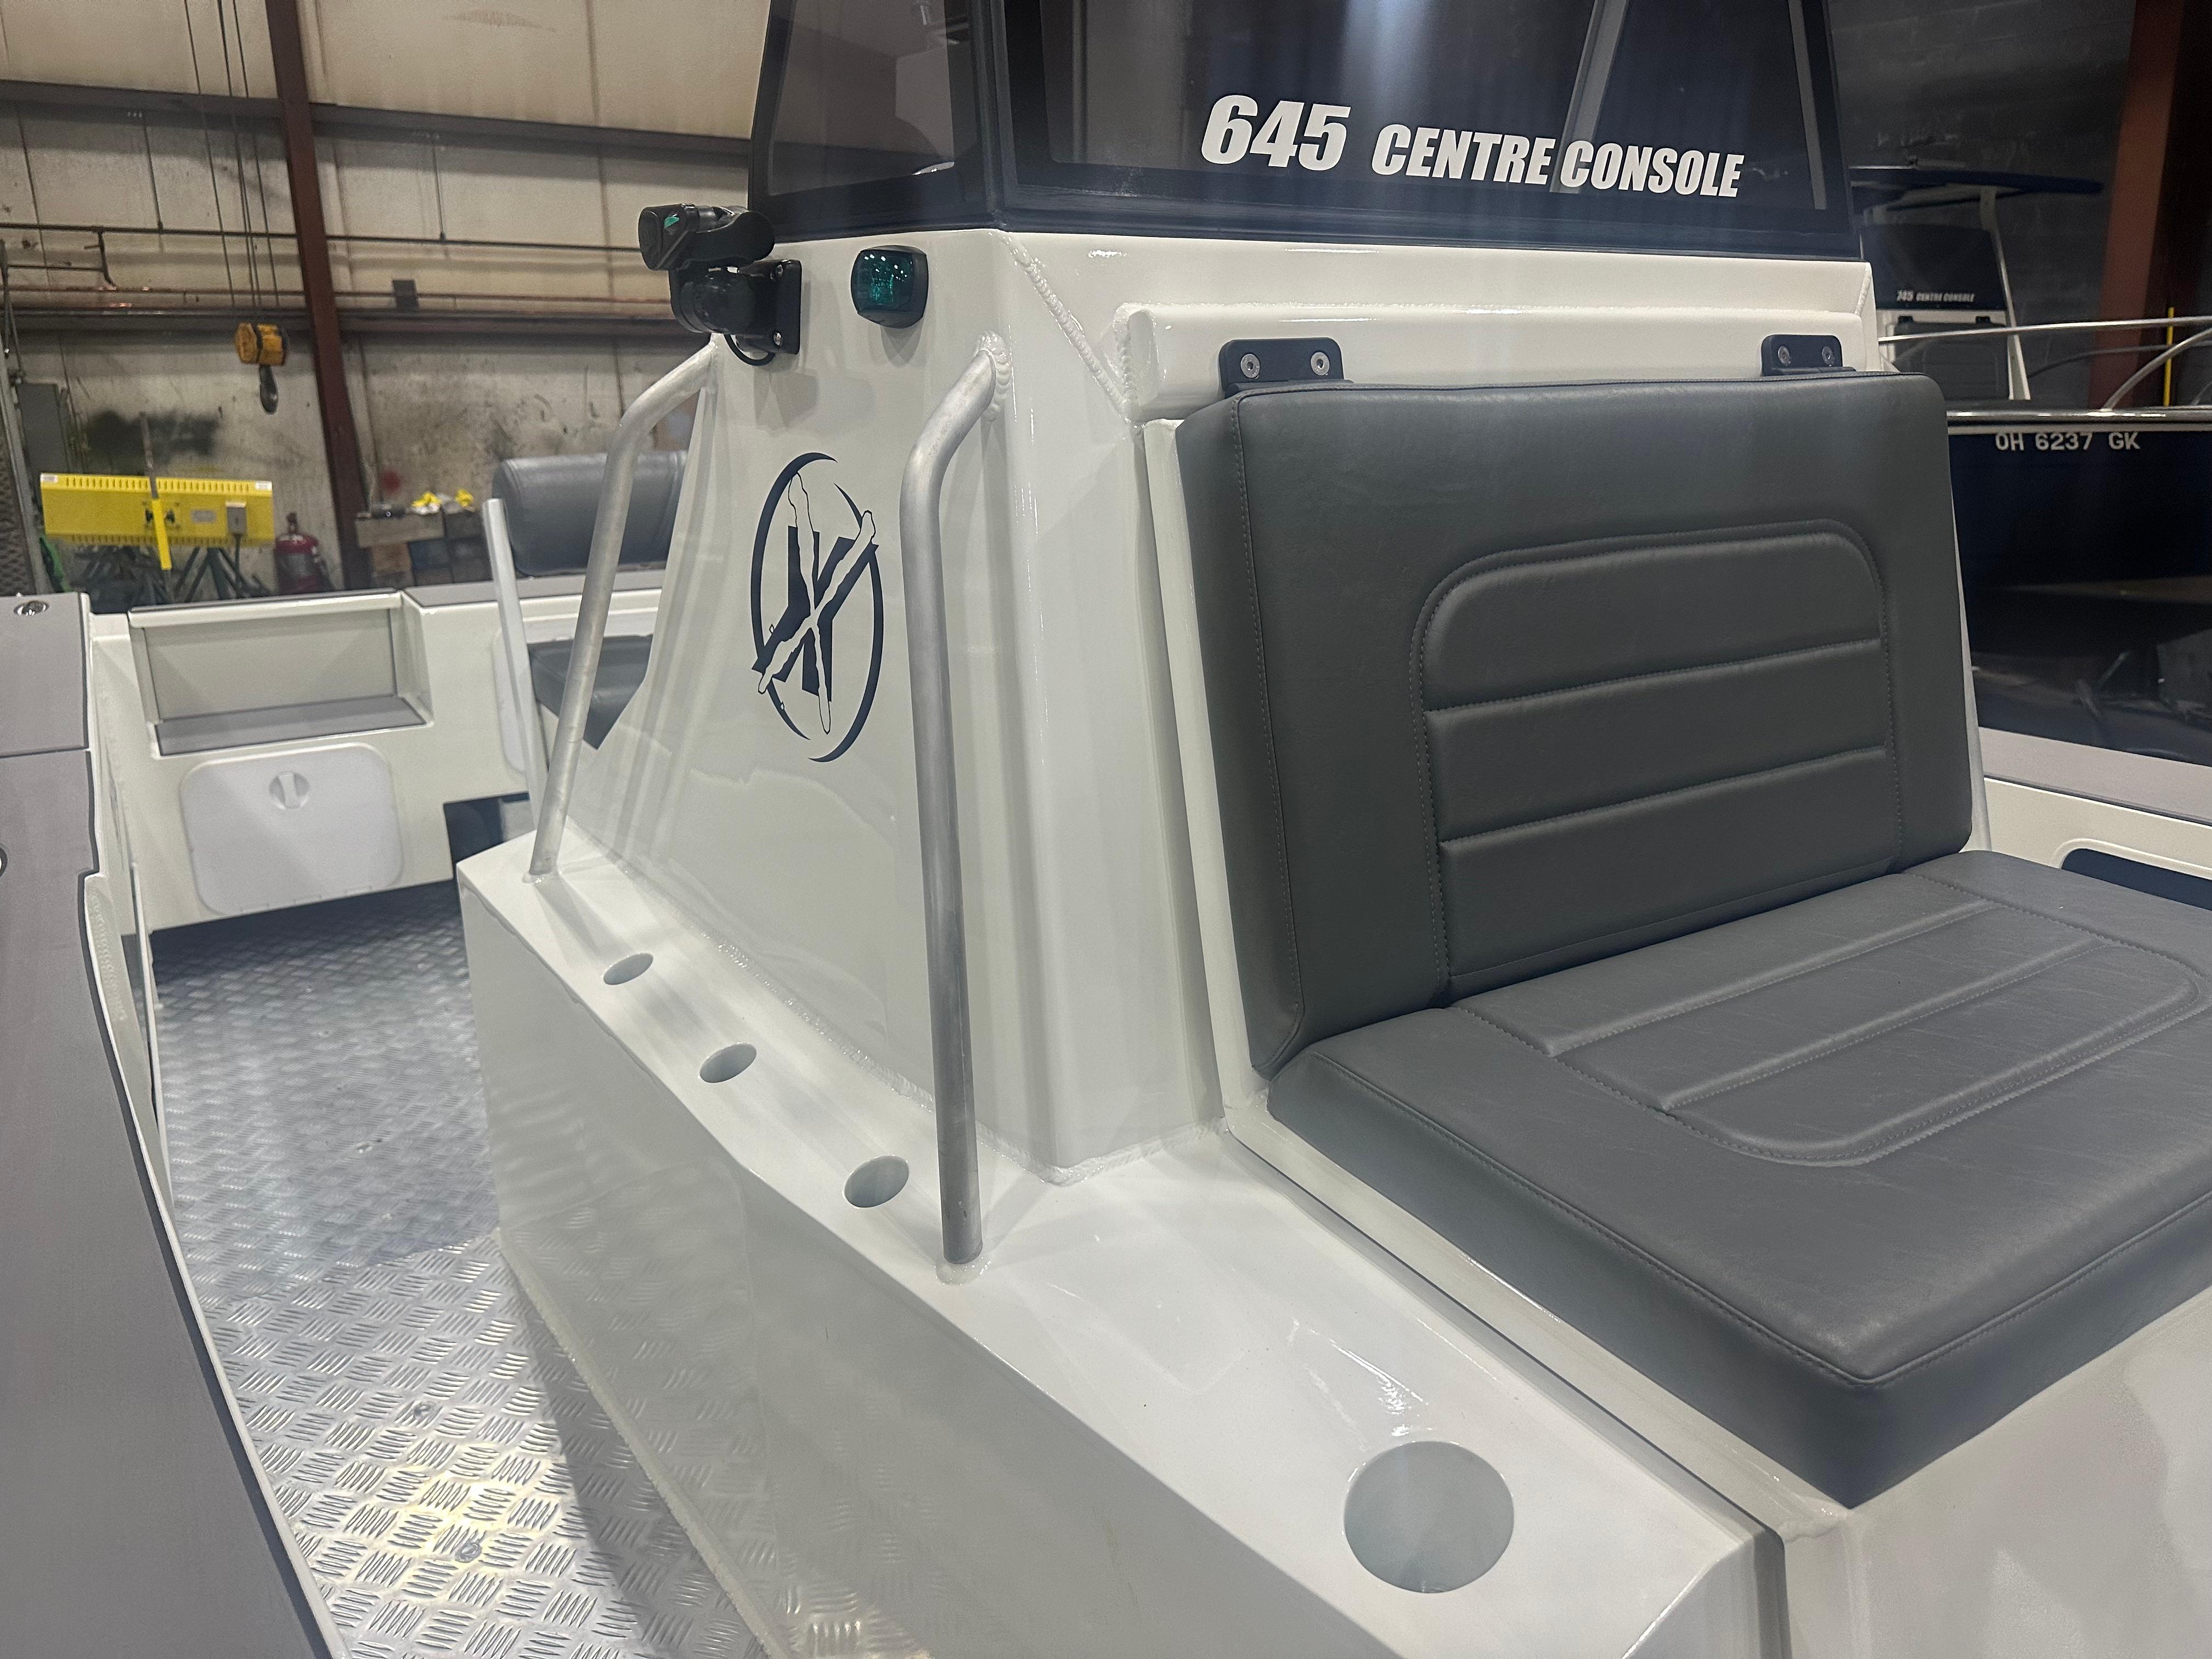 Center Console Moduel with Handrails, Rod Holders, and Cup Holder 